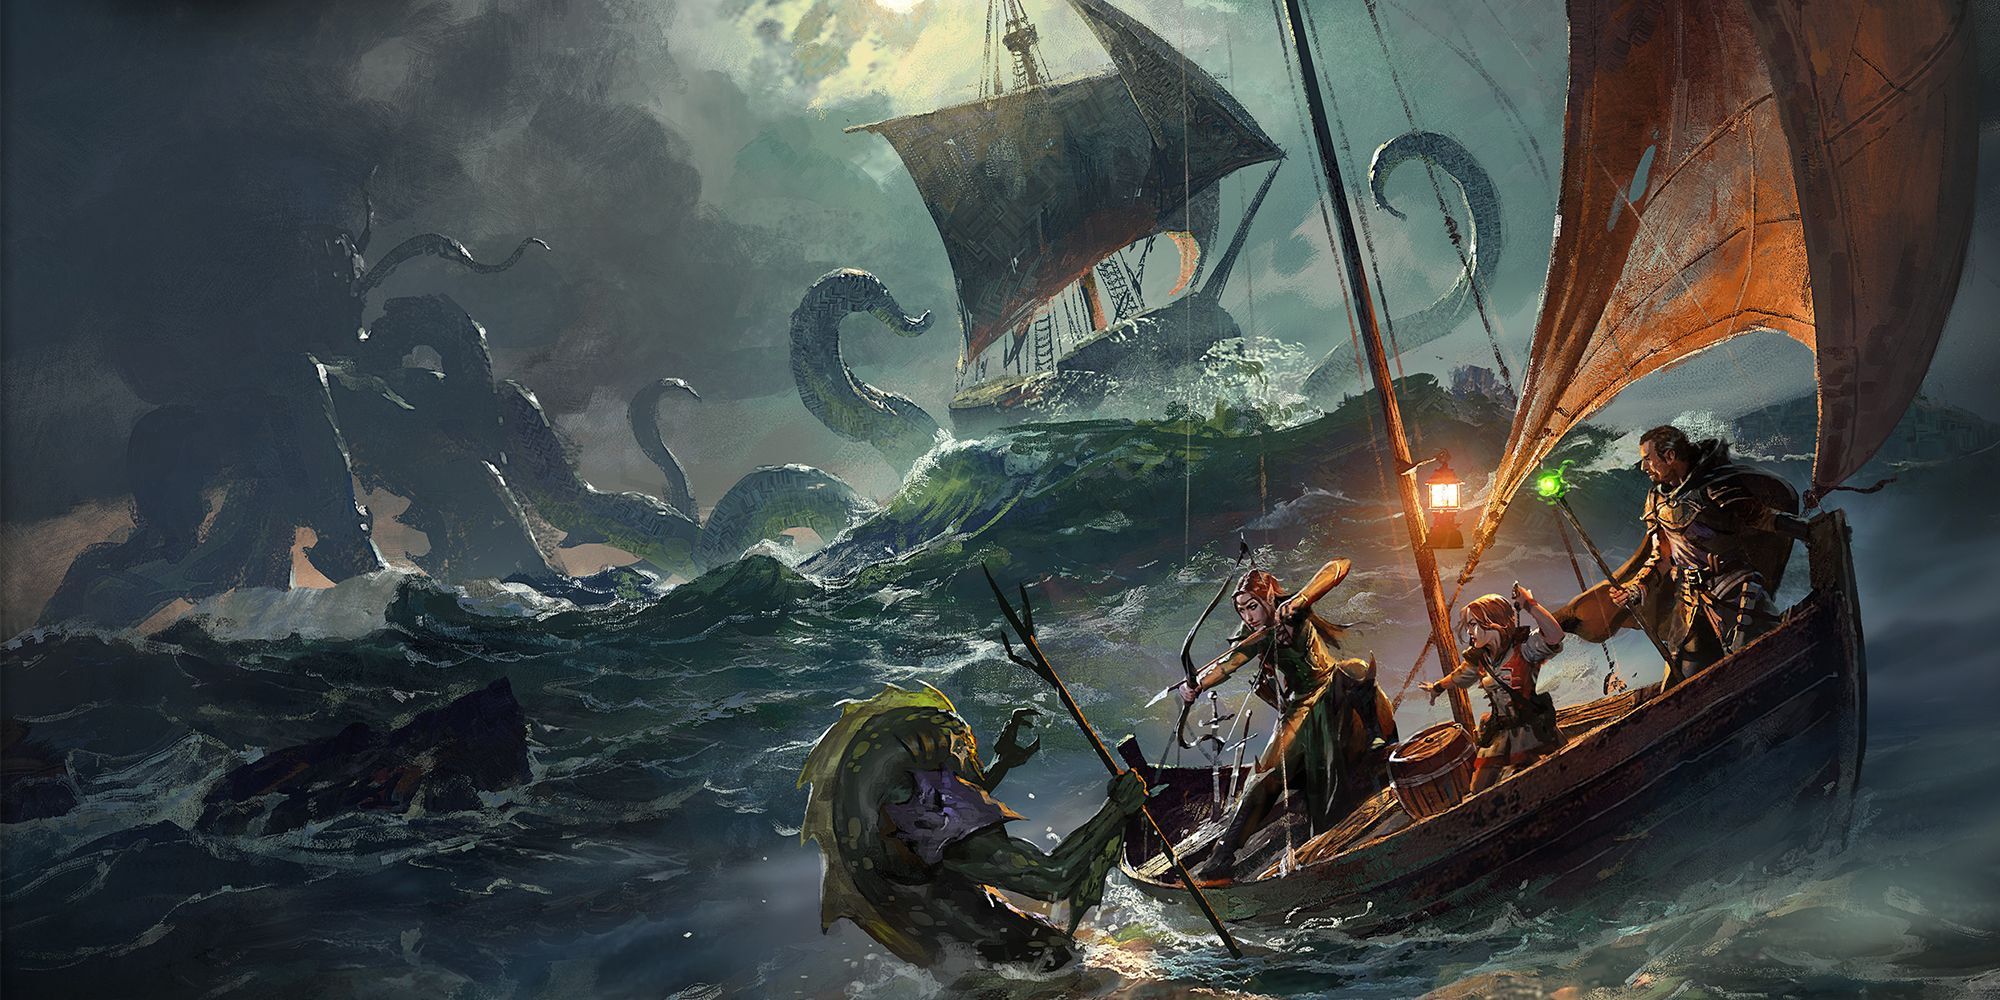 Paladins on a boat with a monster in Dungeons and Dragons